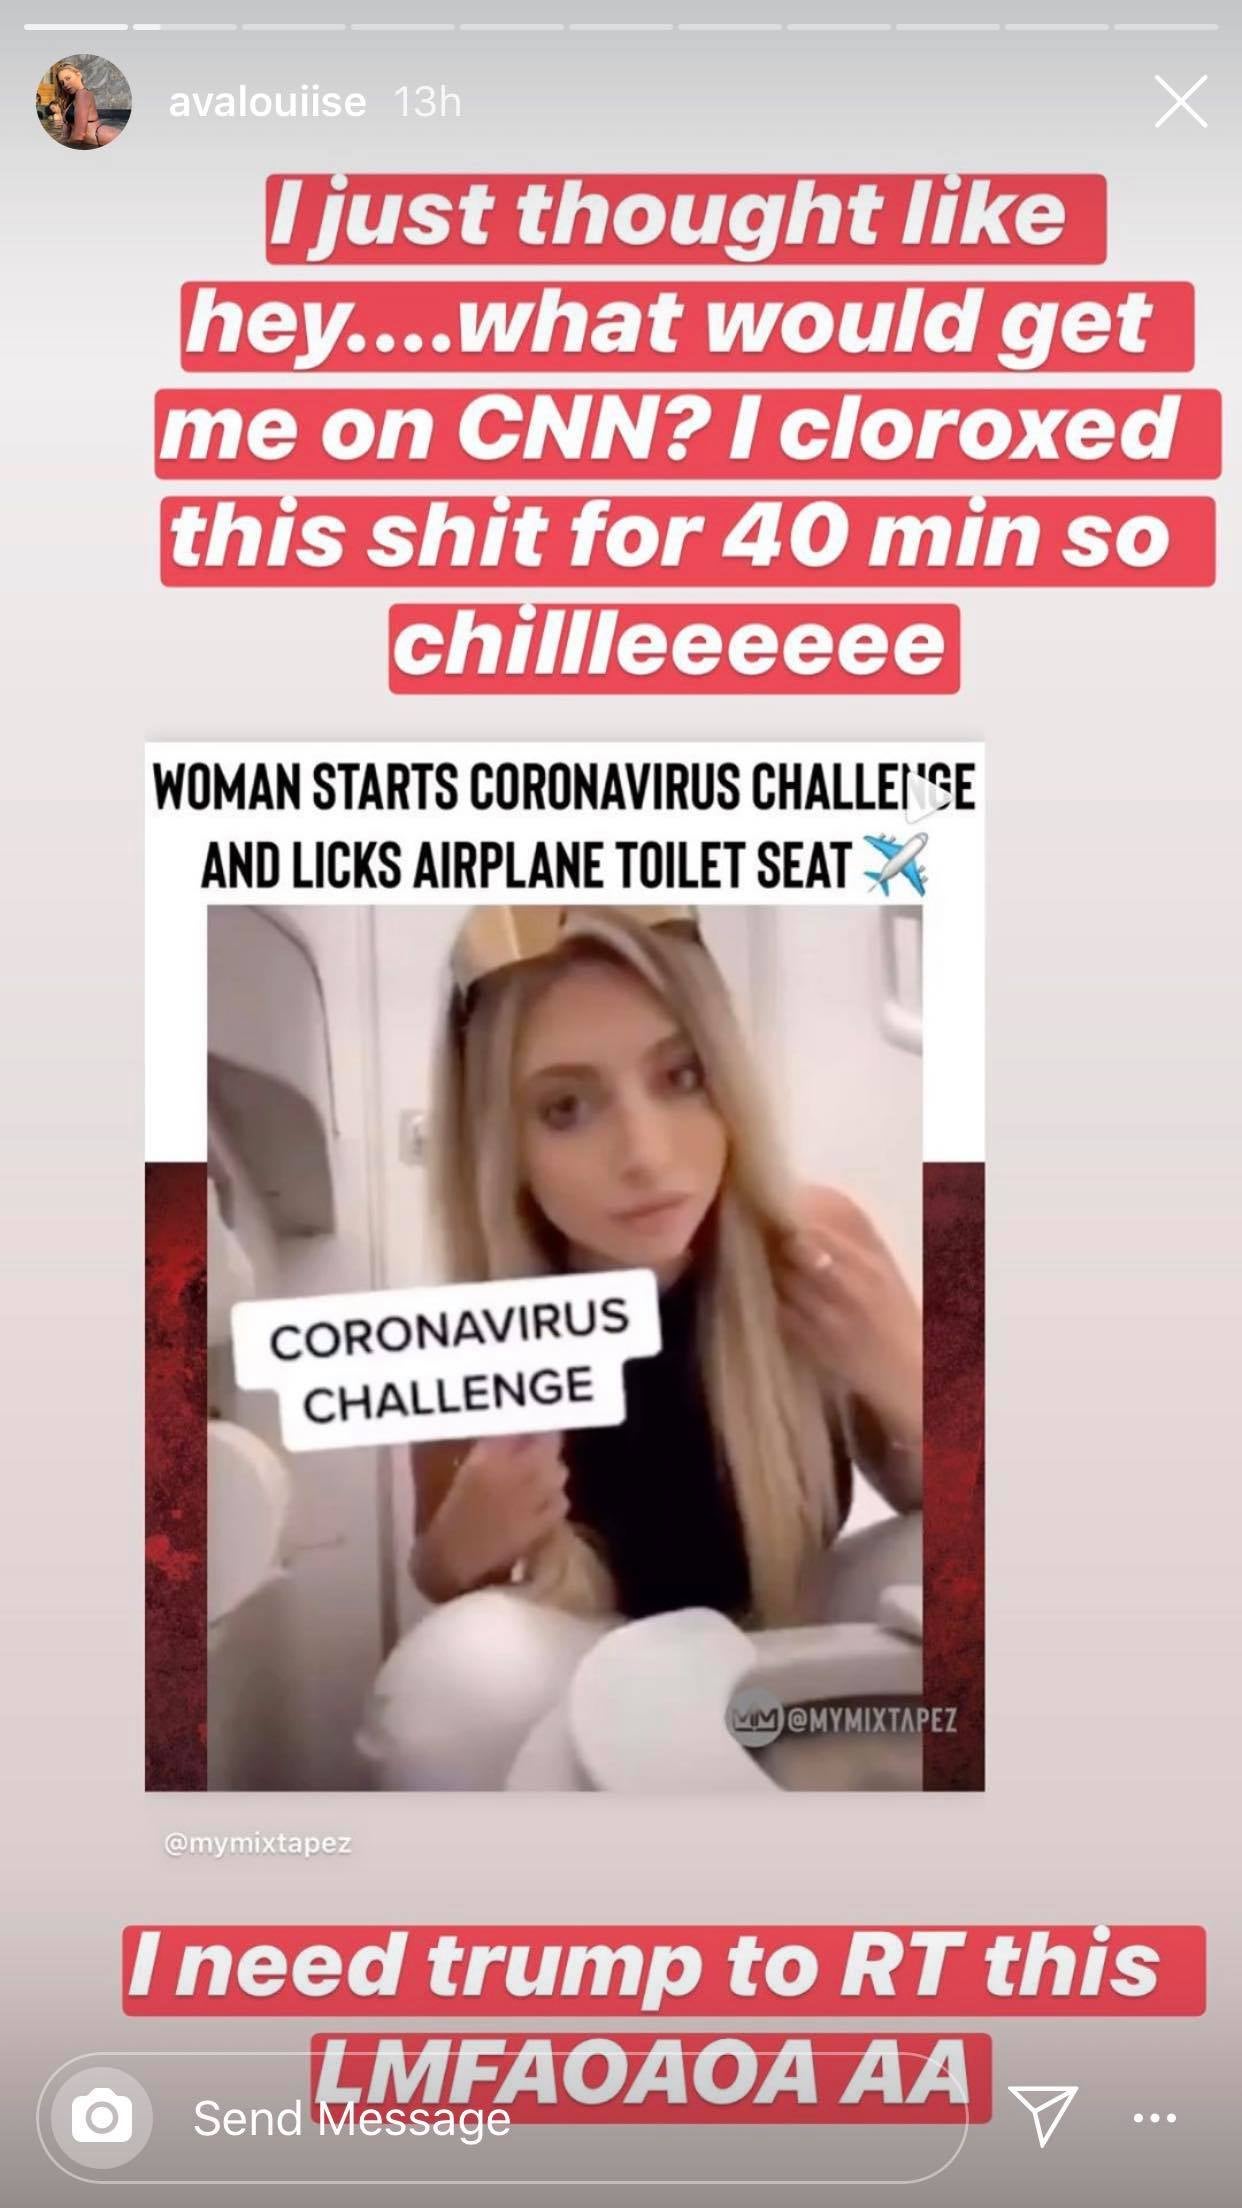 Tik Tok User Goes Viral After Starting &Quot;Coronavirus Challenge&Quot; By Licking Airplane Toilet Seat - World Of Buzz 2